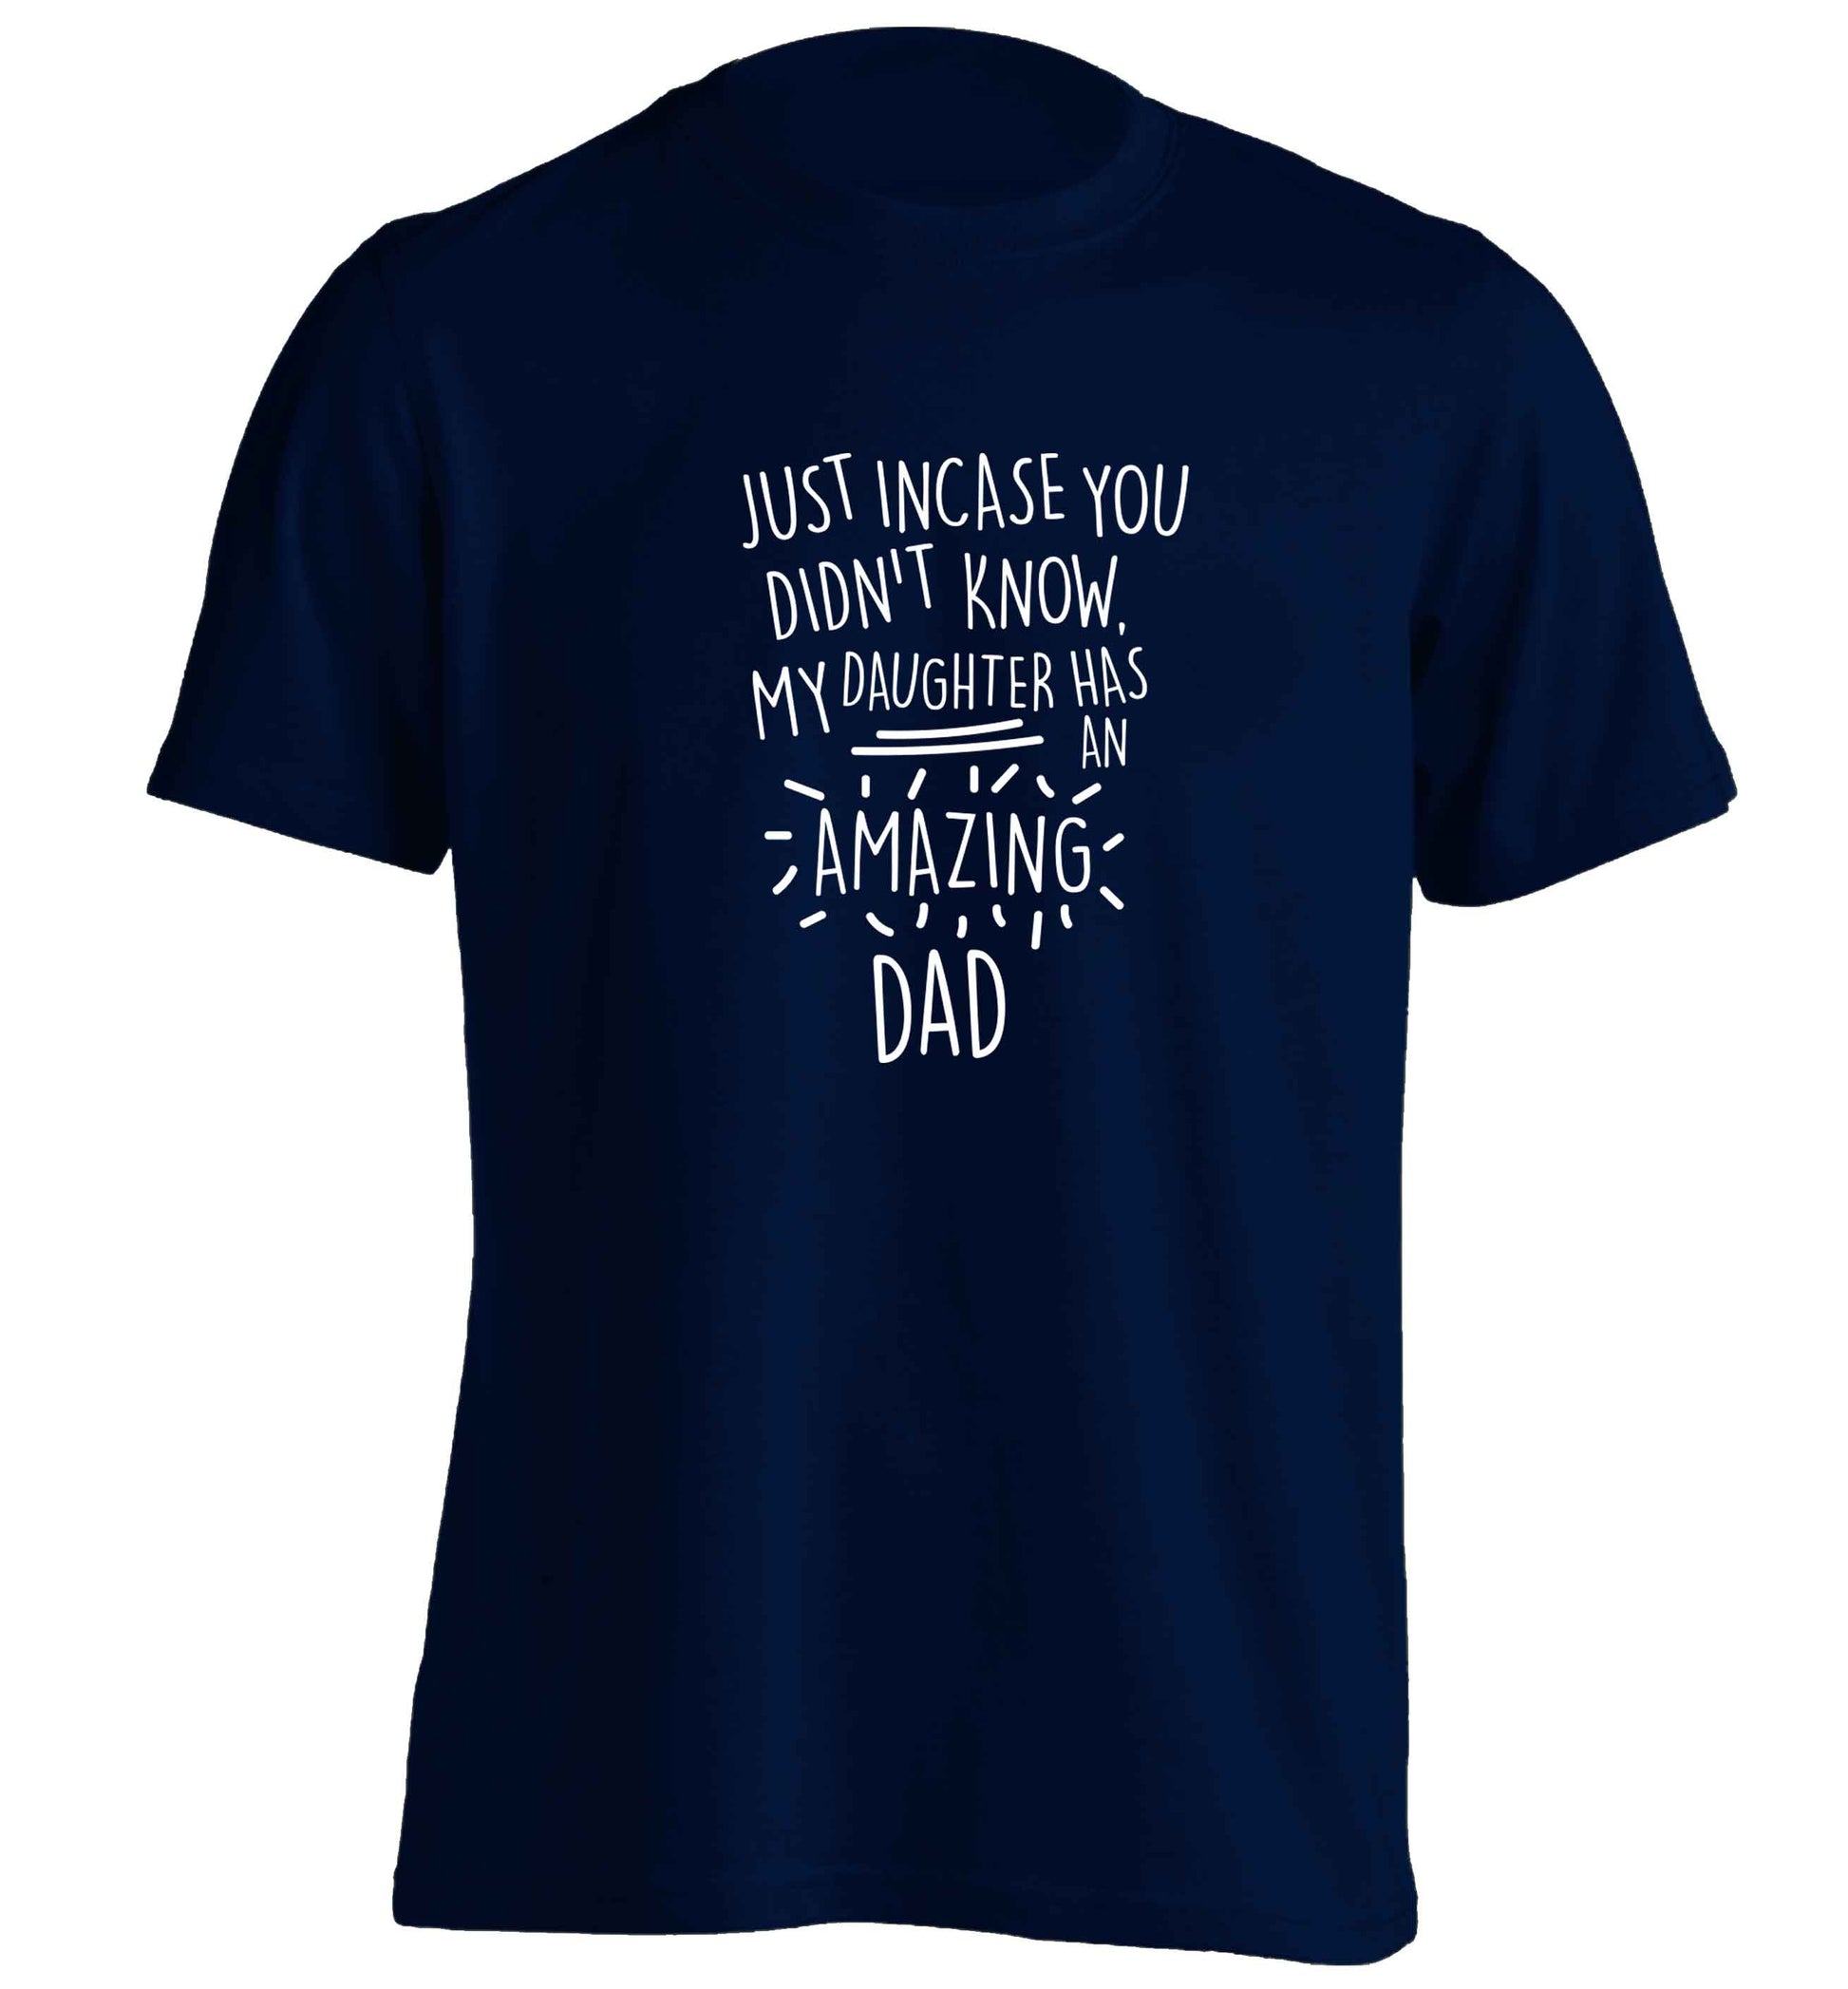 Just incase you didn't know my daughter has an amazing dad adults unisex navy Tshirt 2XL